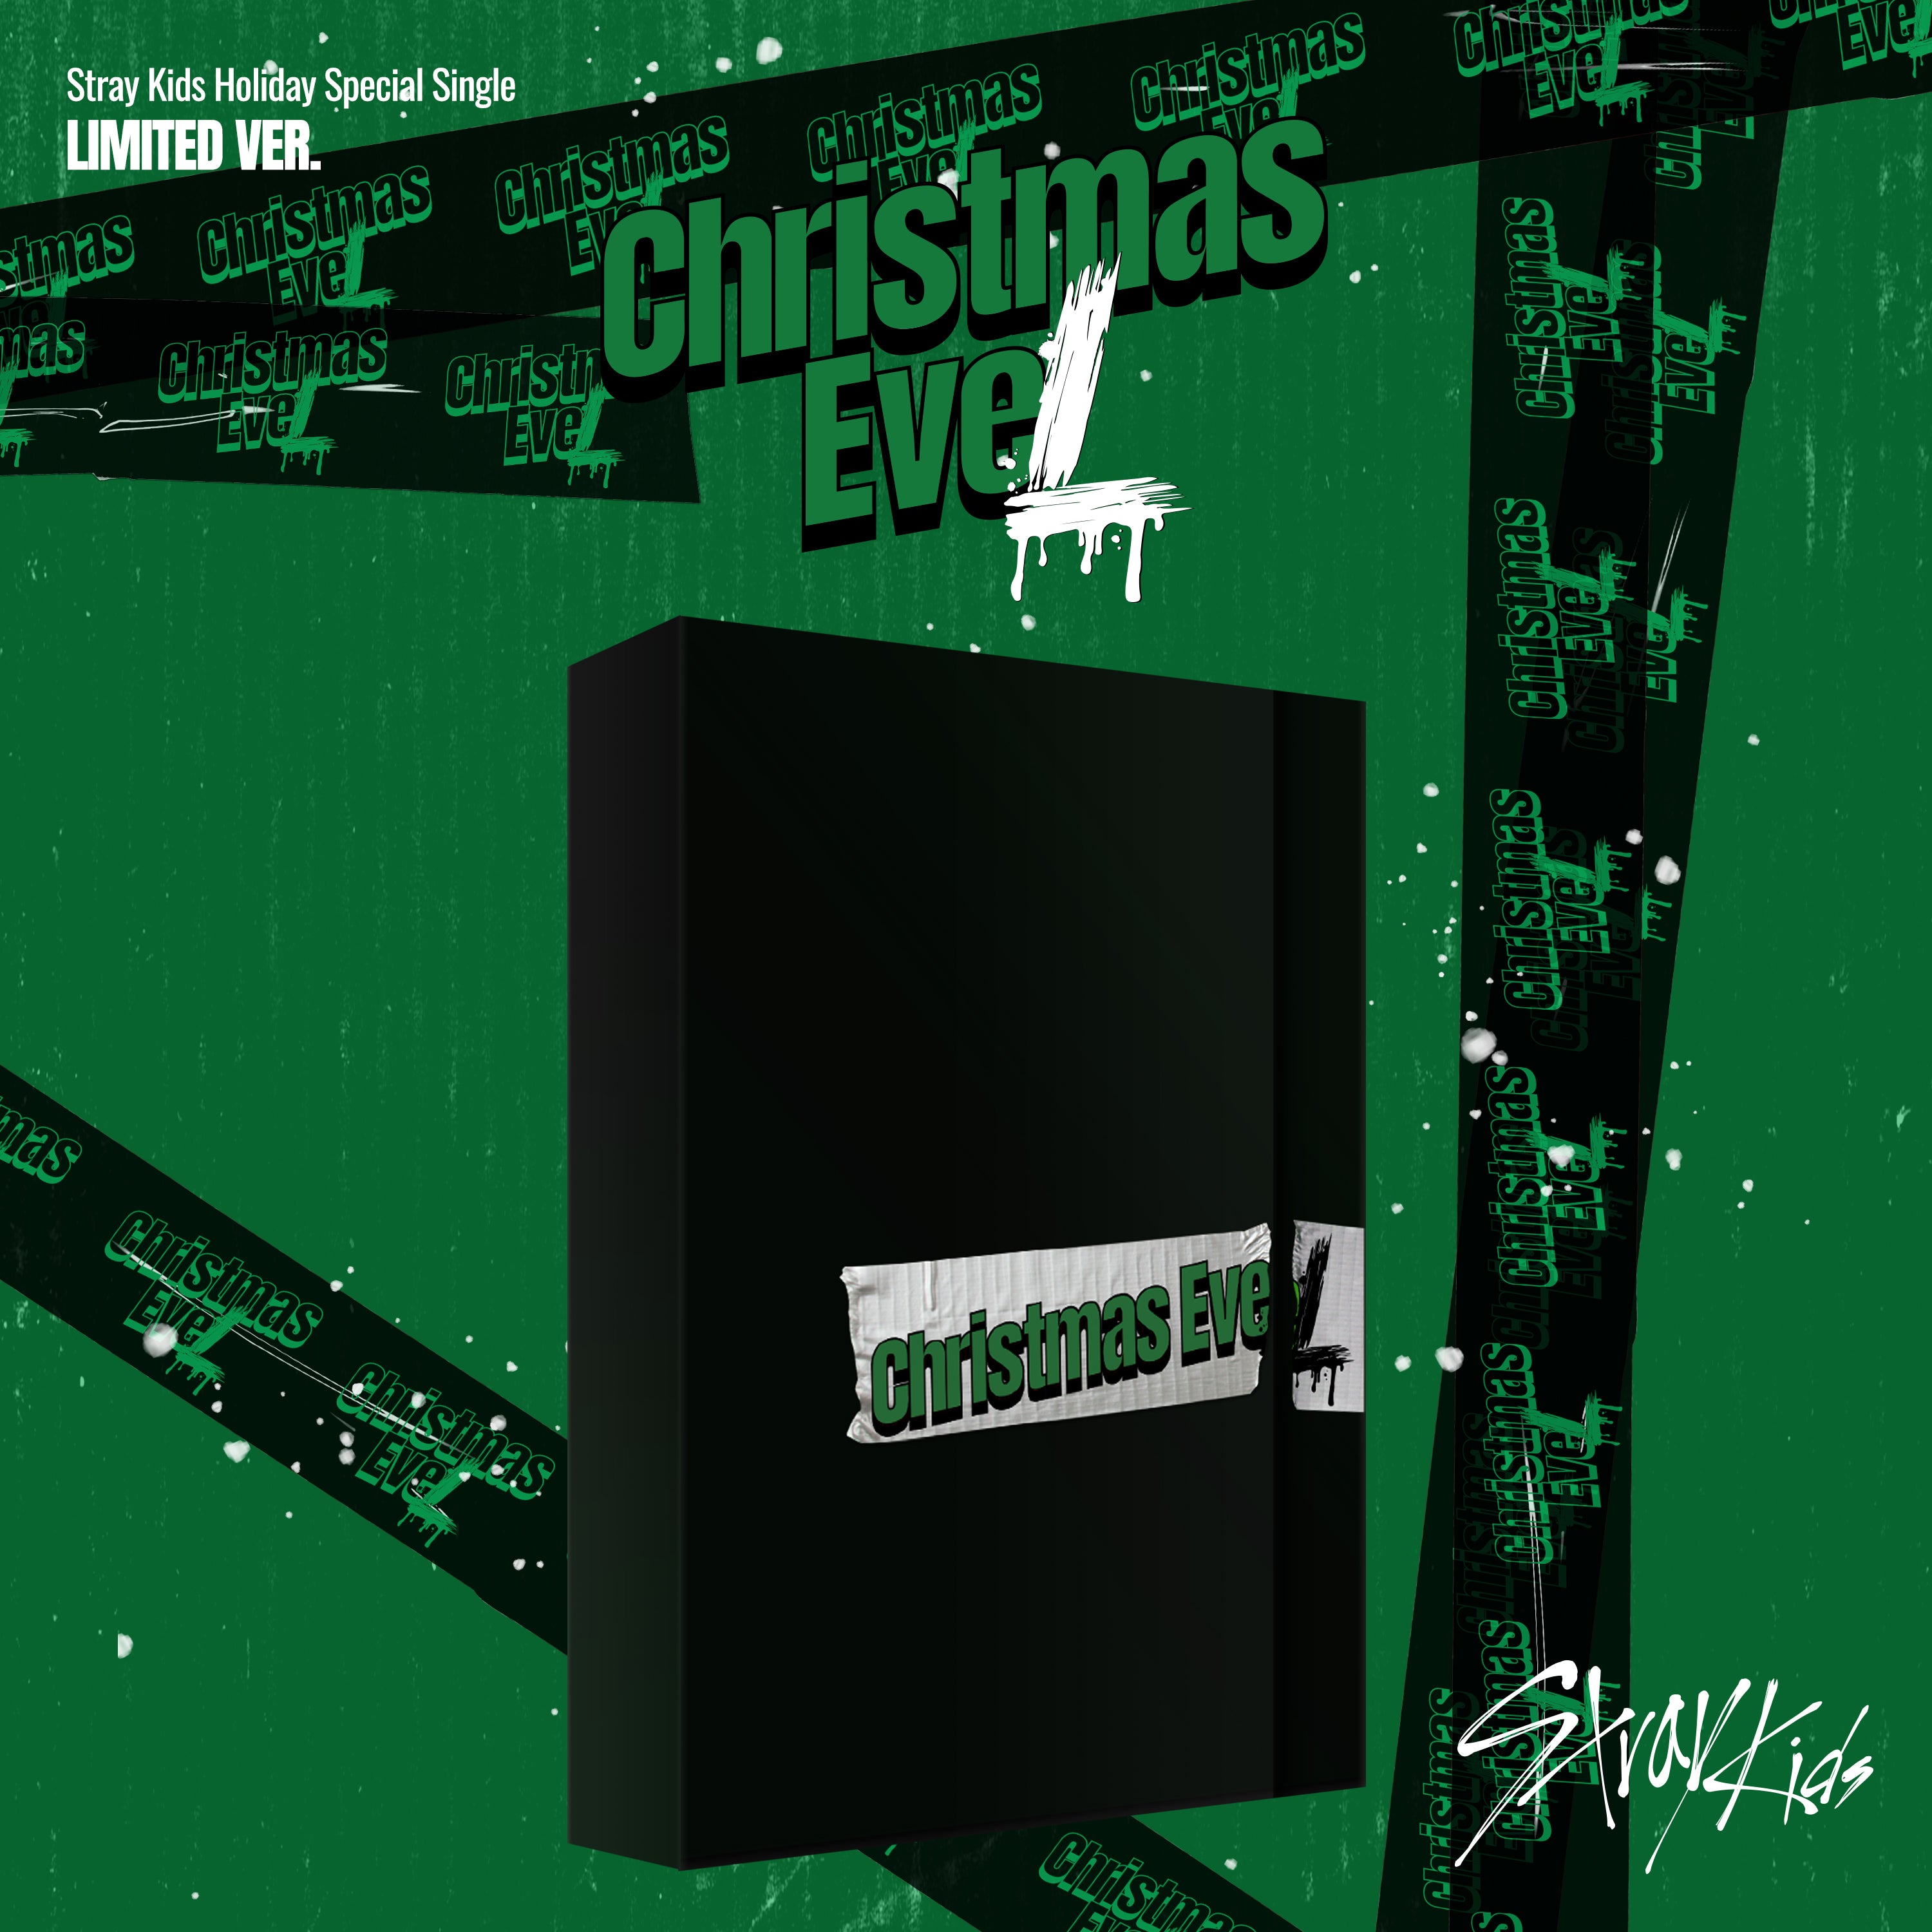 STRAY KIDS HOLIDAY SPECIAL SINGLE ALBUM - CHRISTMAS EVEL (LIMITED 